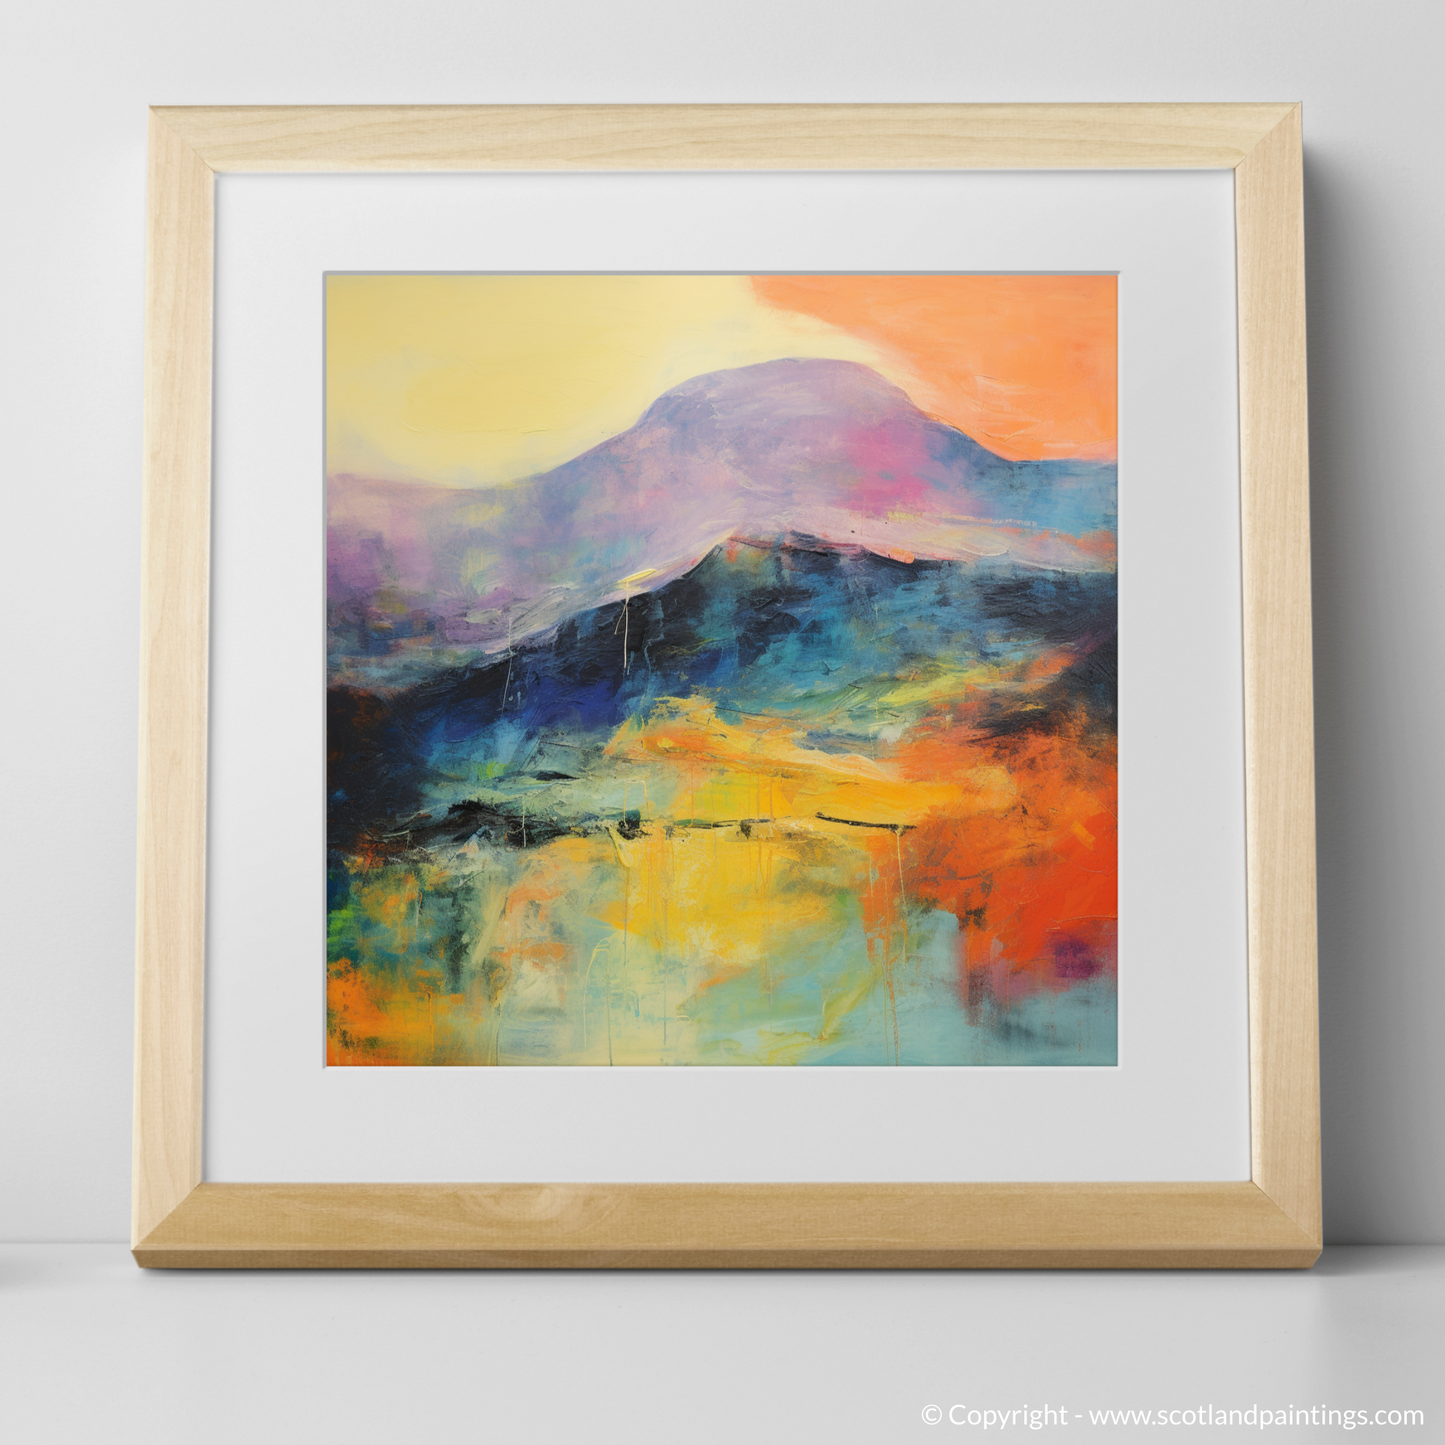 Art Print of Ben Lawers, Perth and Kinross with a natural frame